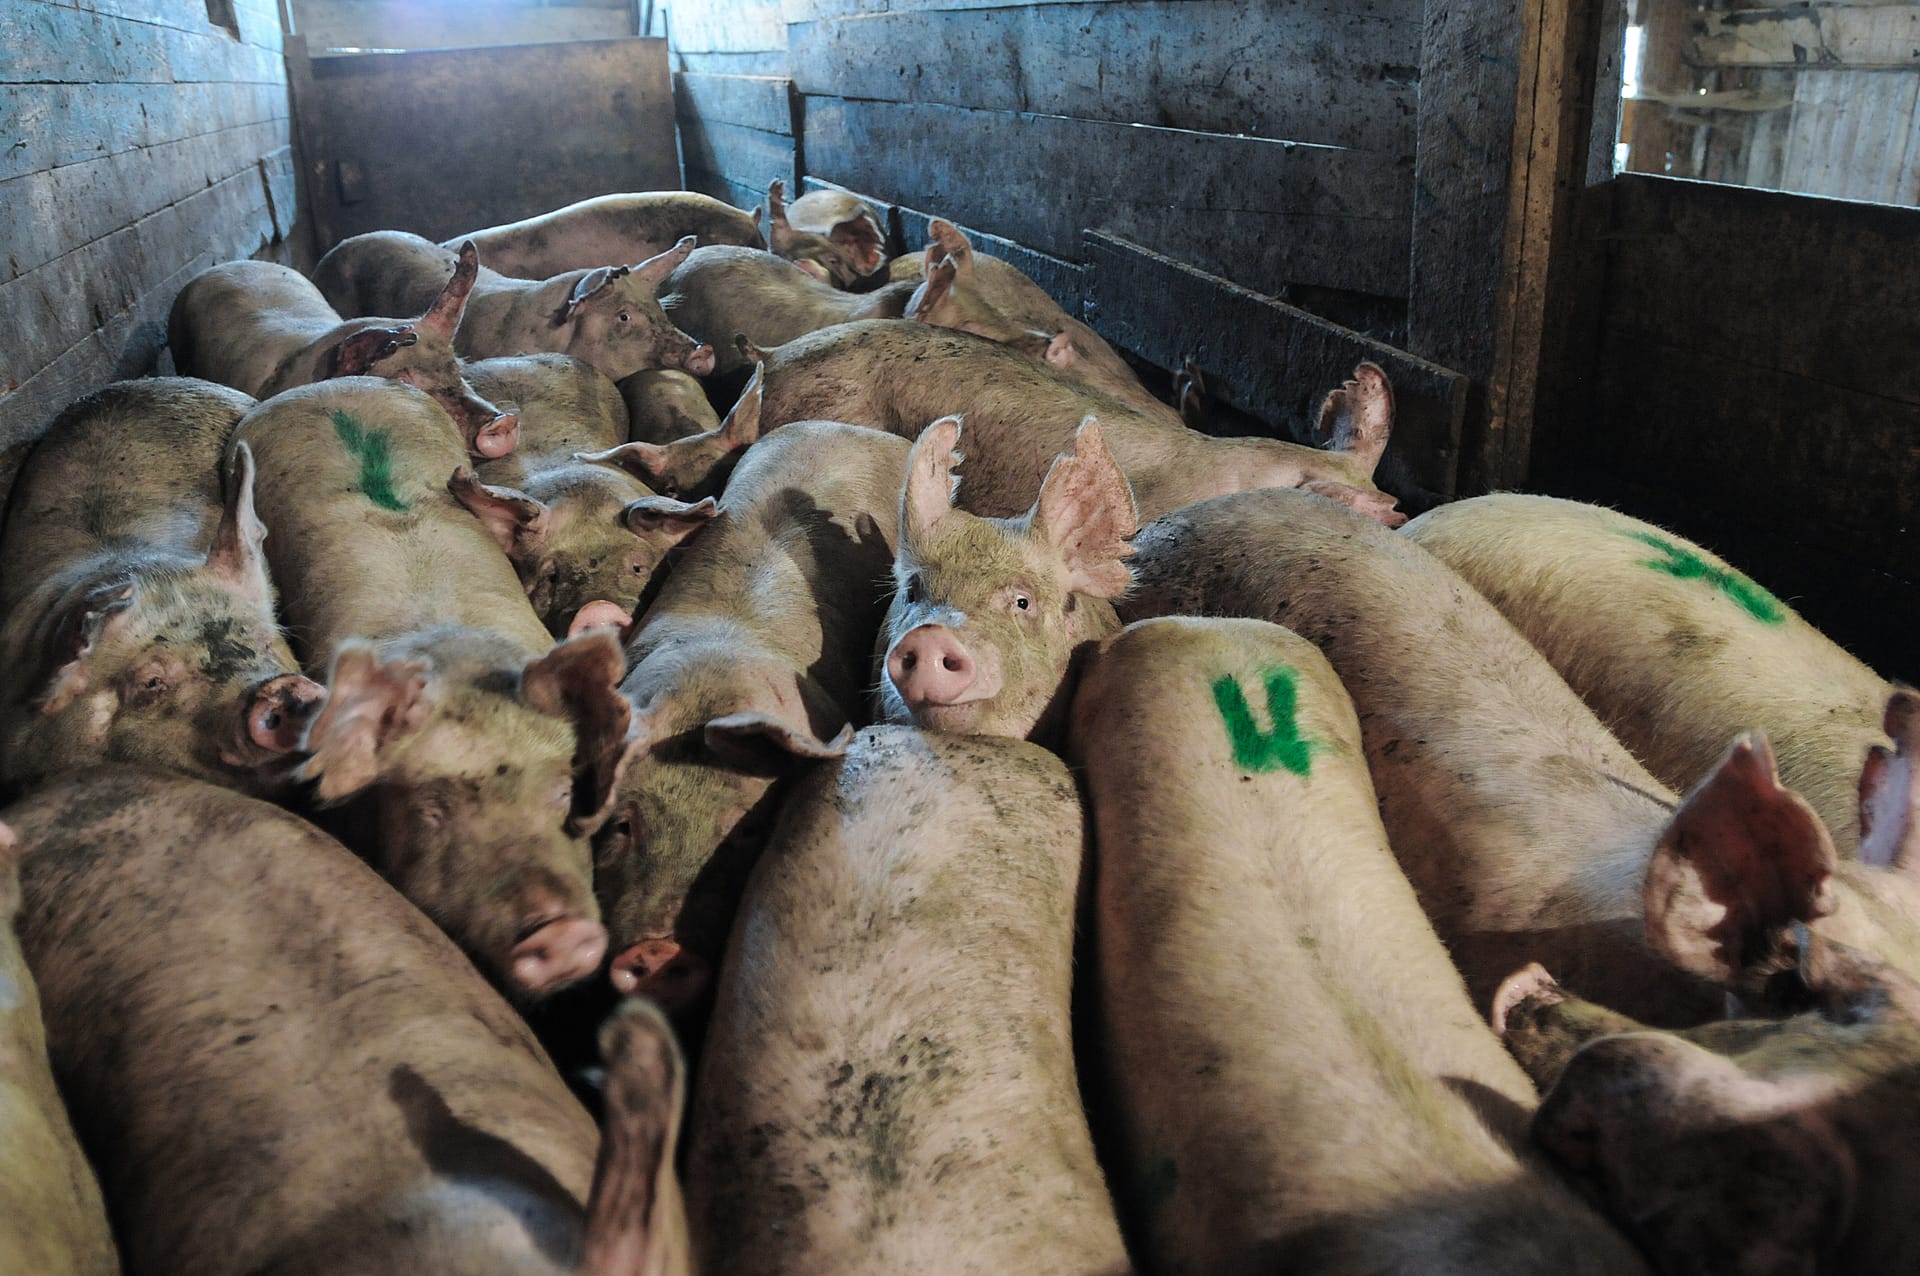 Image shows crowded pigs at slaughterhouse.